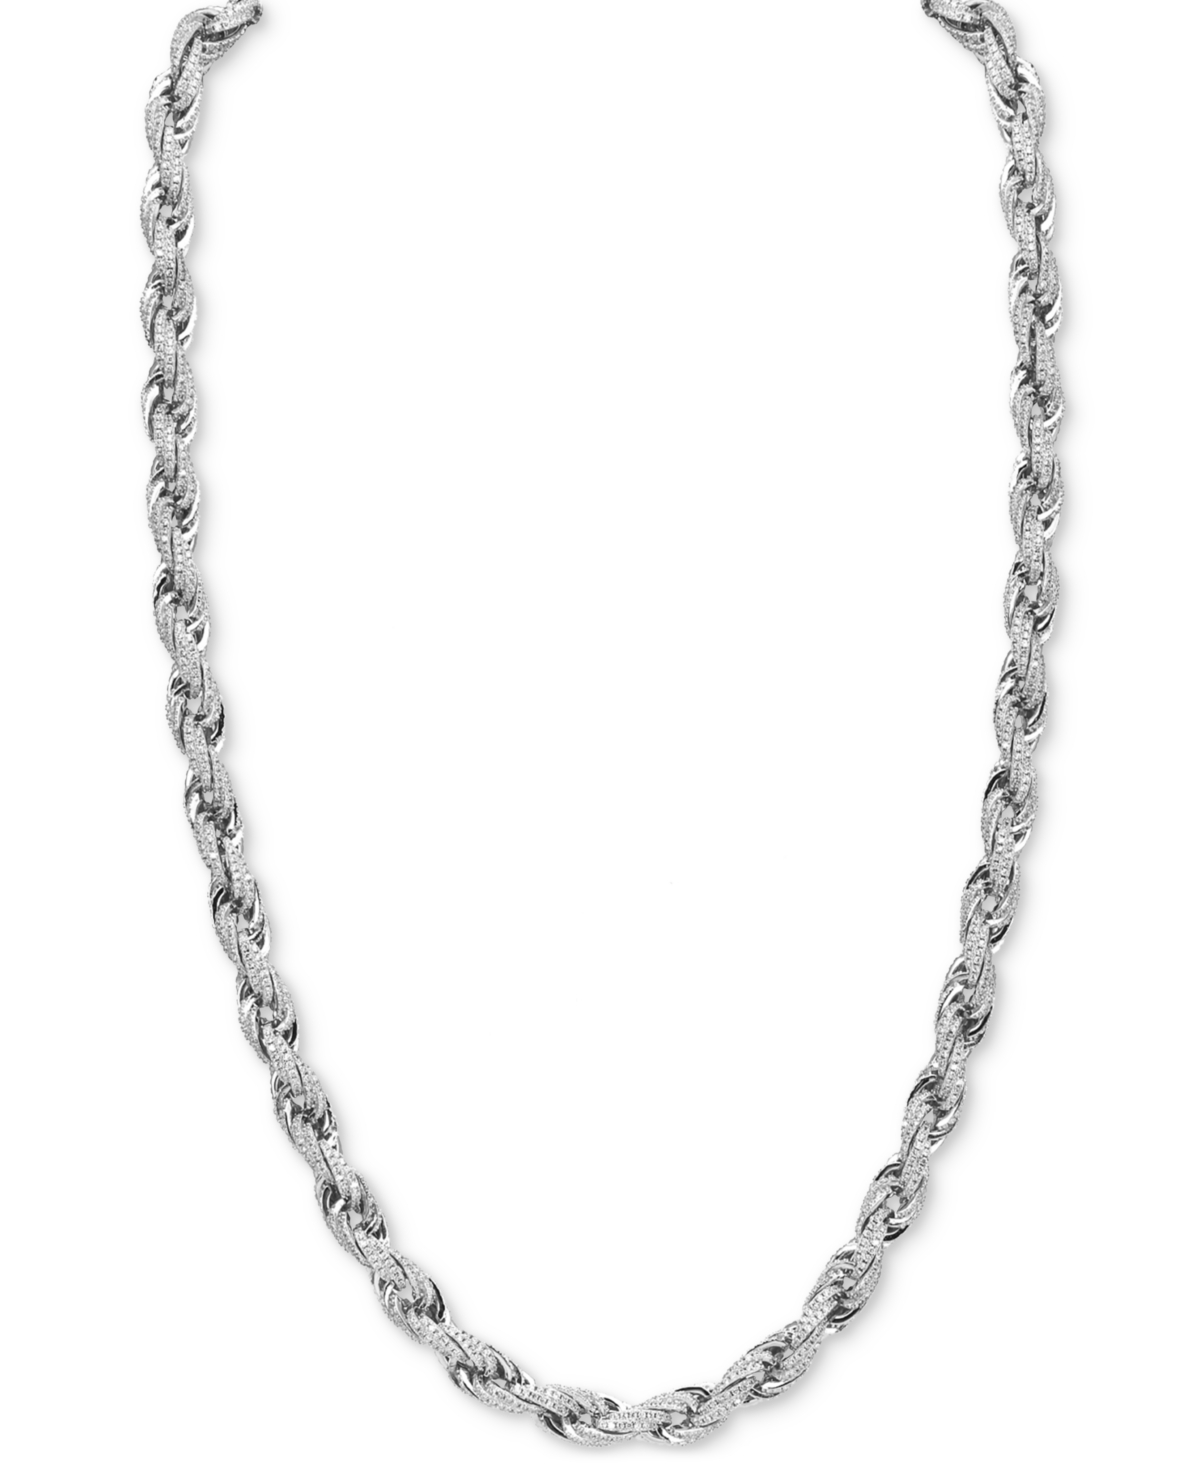 Men's Cubic Zirconia Rope Link 22" Chain Necklace in Sterling Silver, Created for Macy's - Silver